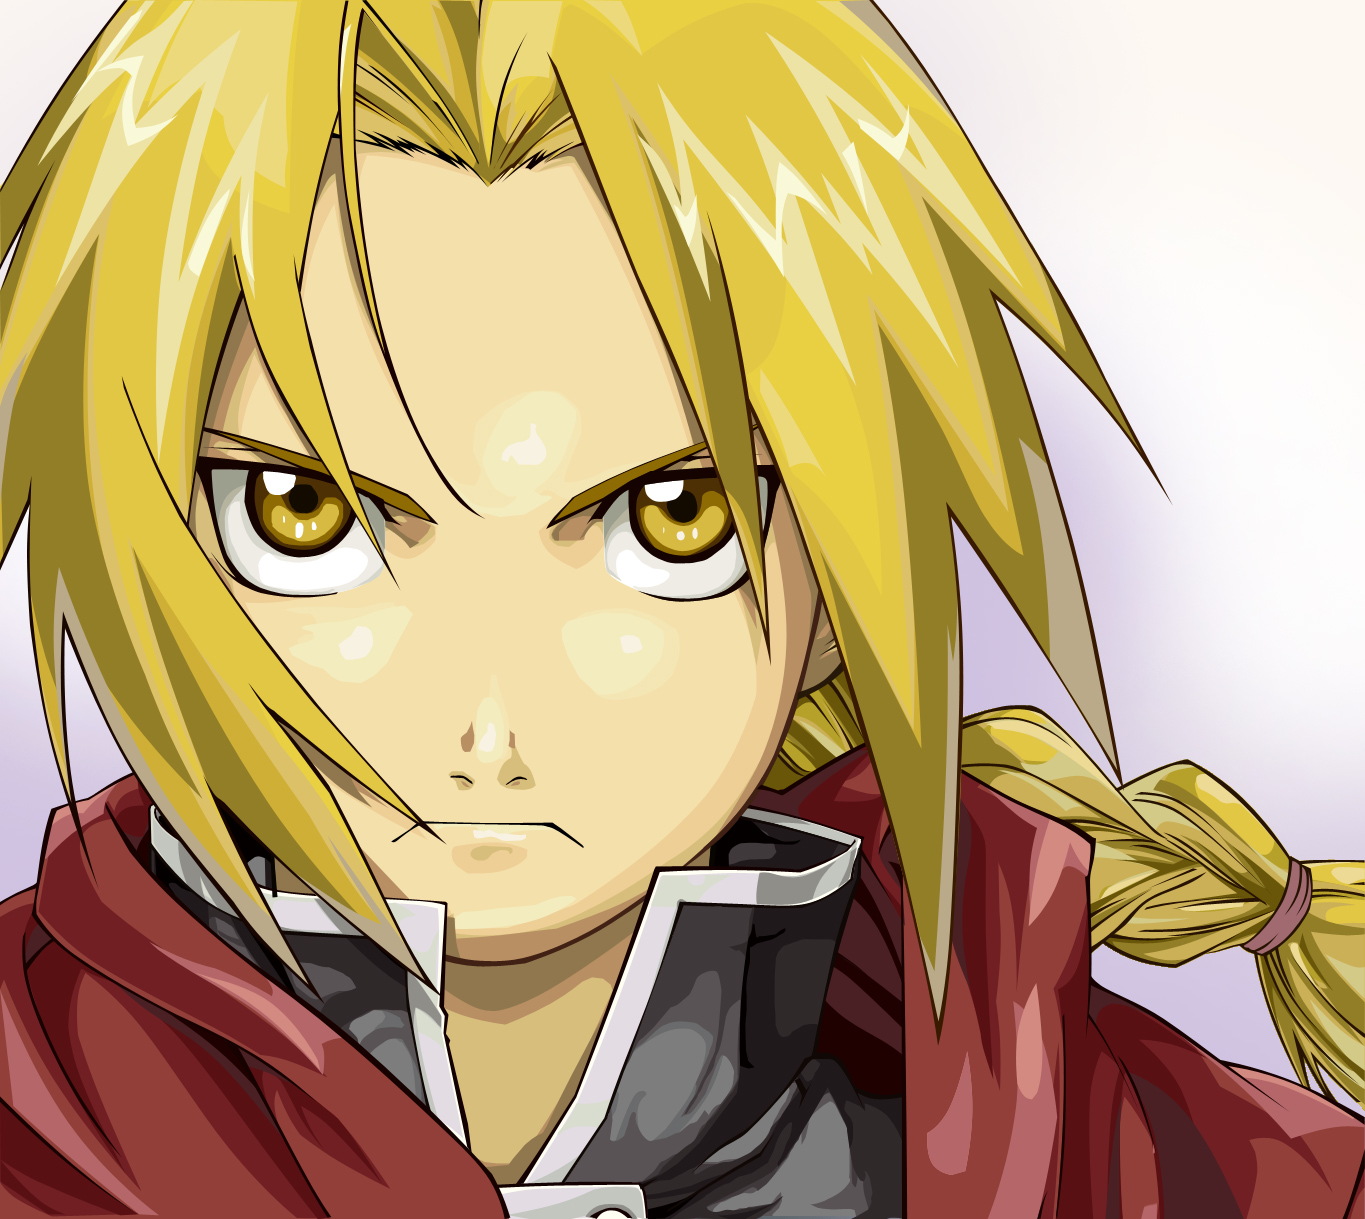 Edward Elric Drawing : 9 Tsundere Boys In Anime You'll Absolutely Love ...